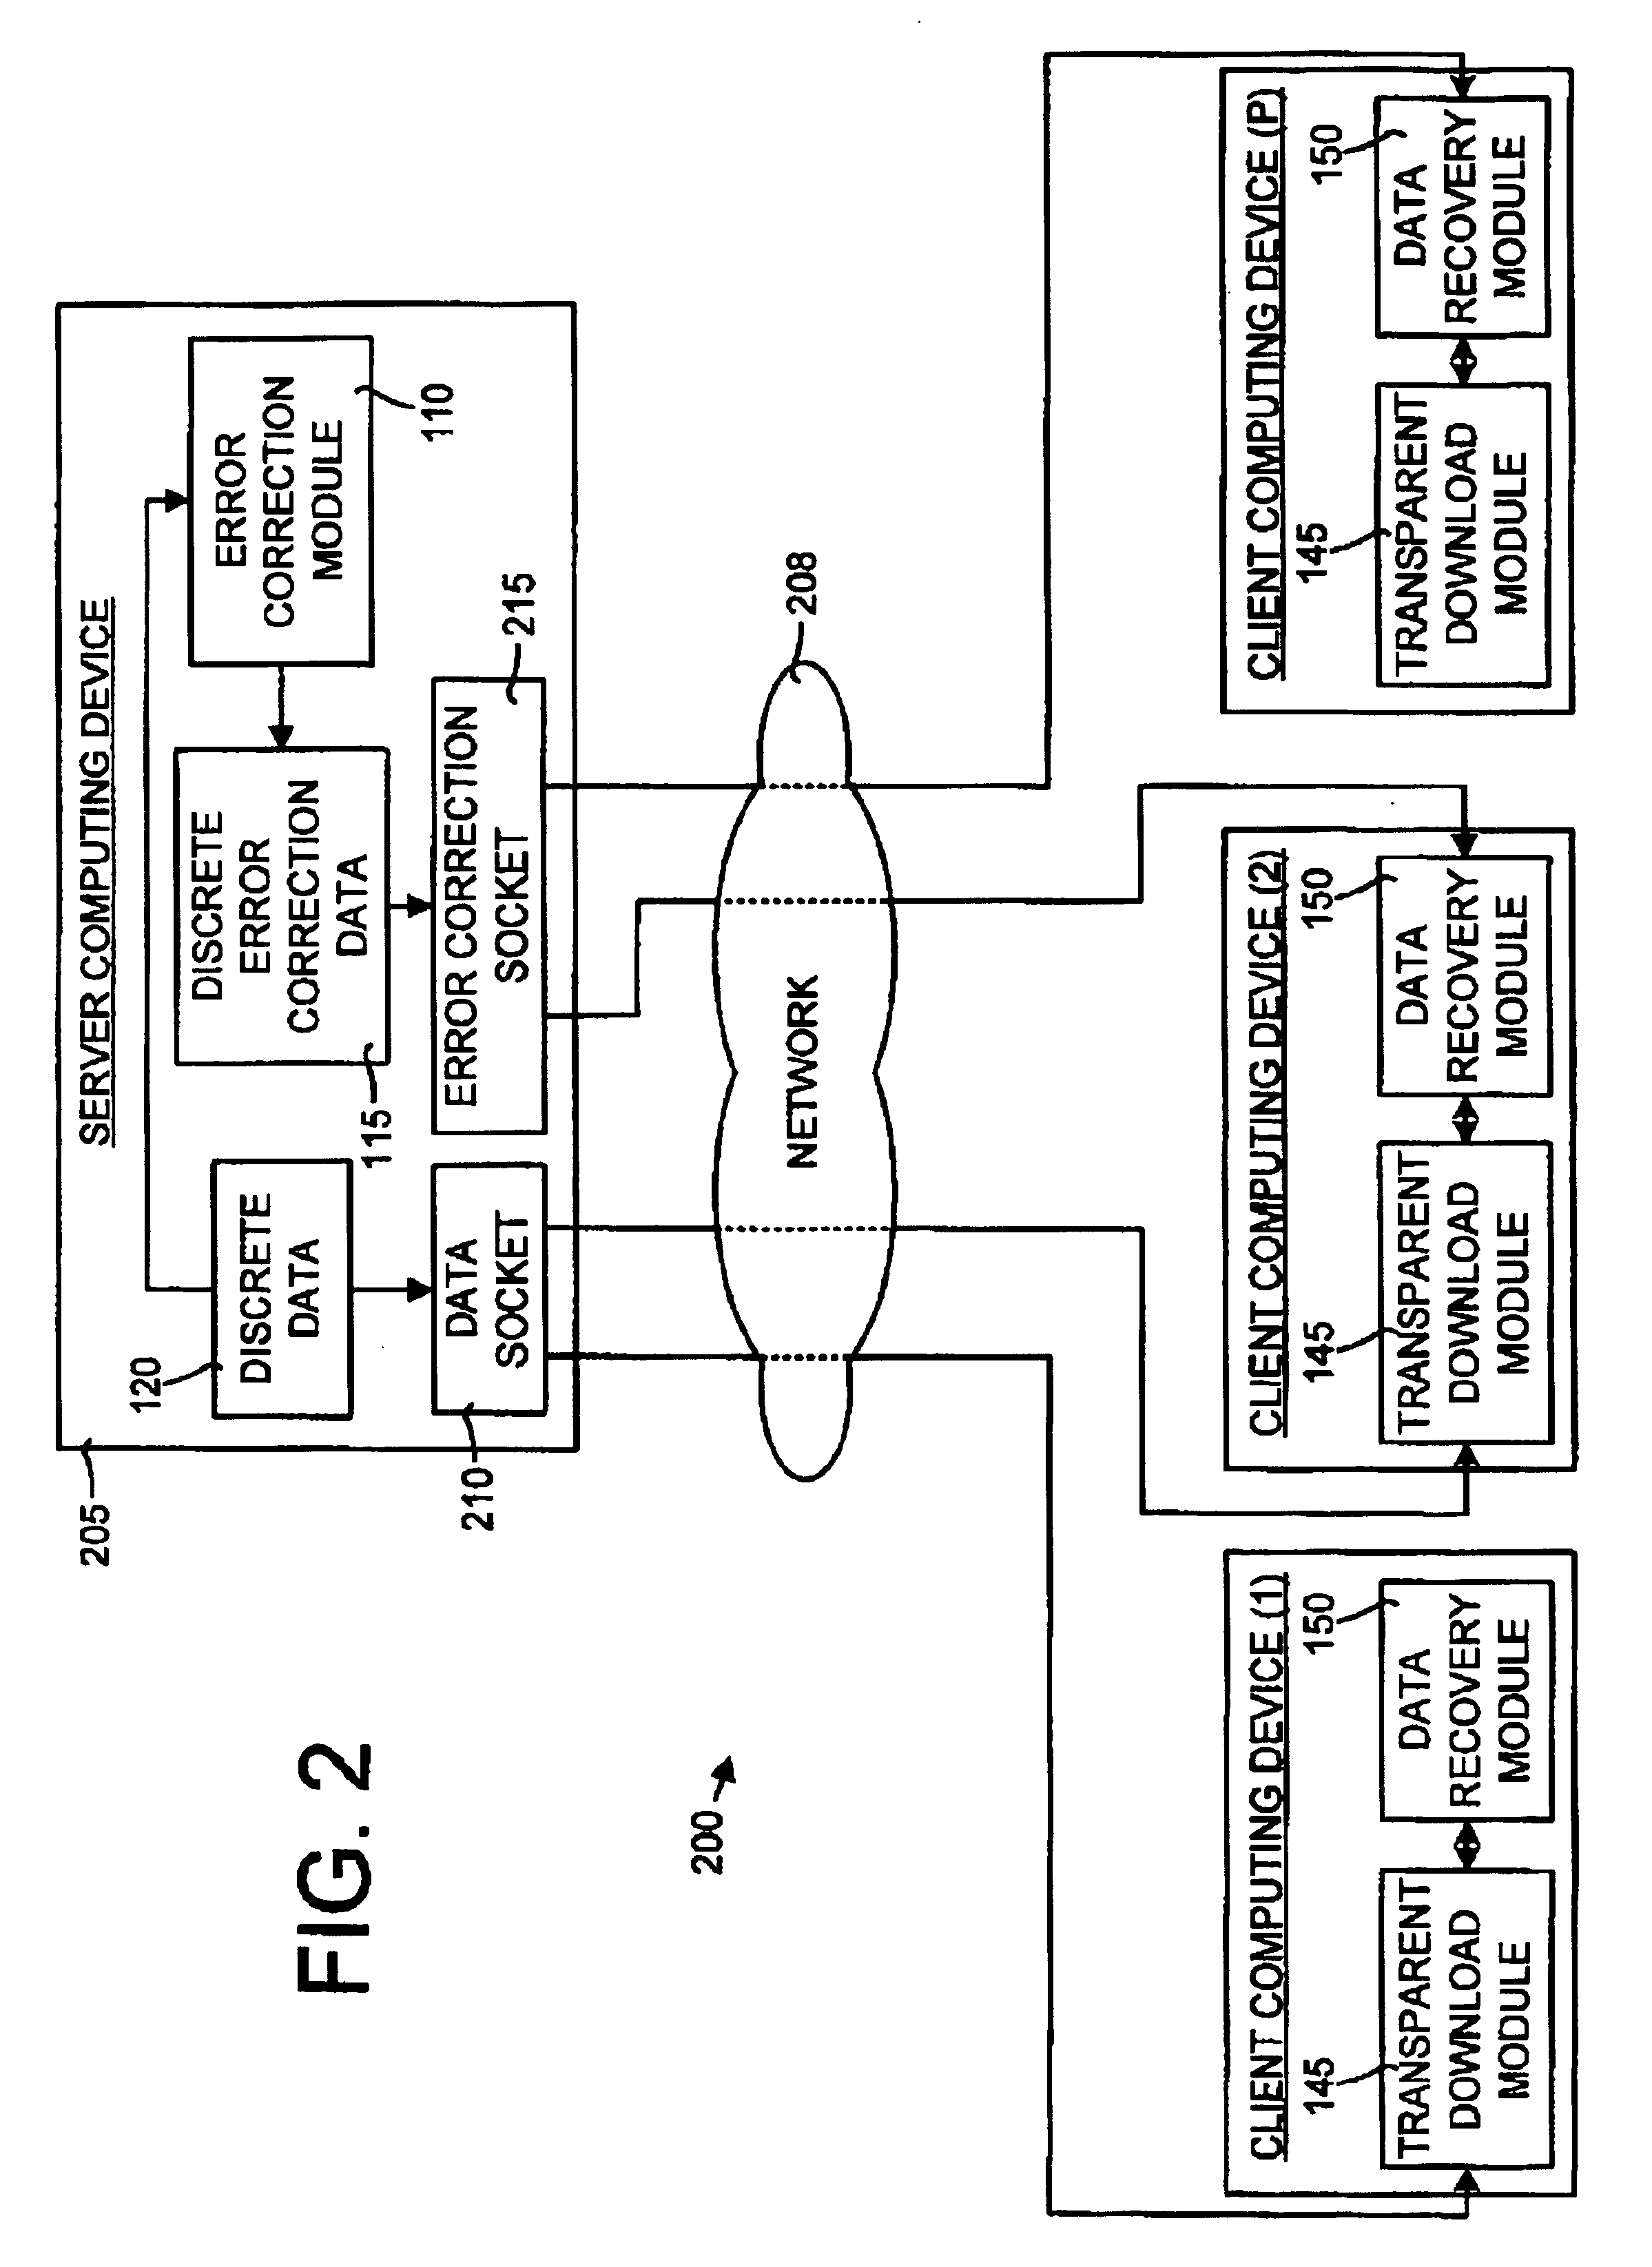 System and method for transparent electronic data transfer using error correction to facilitate bandwidth-efficient data recovery